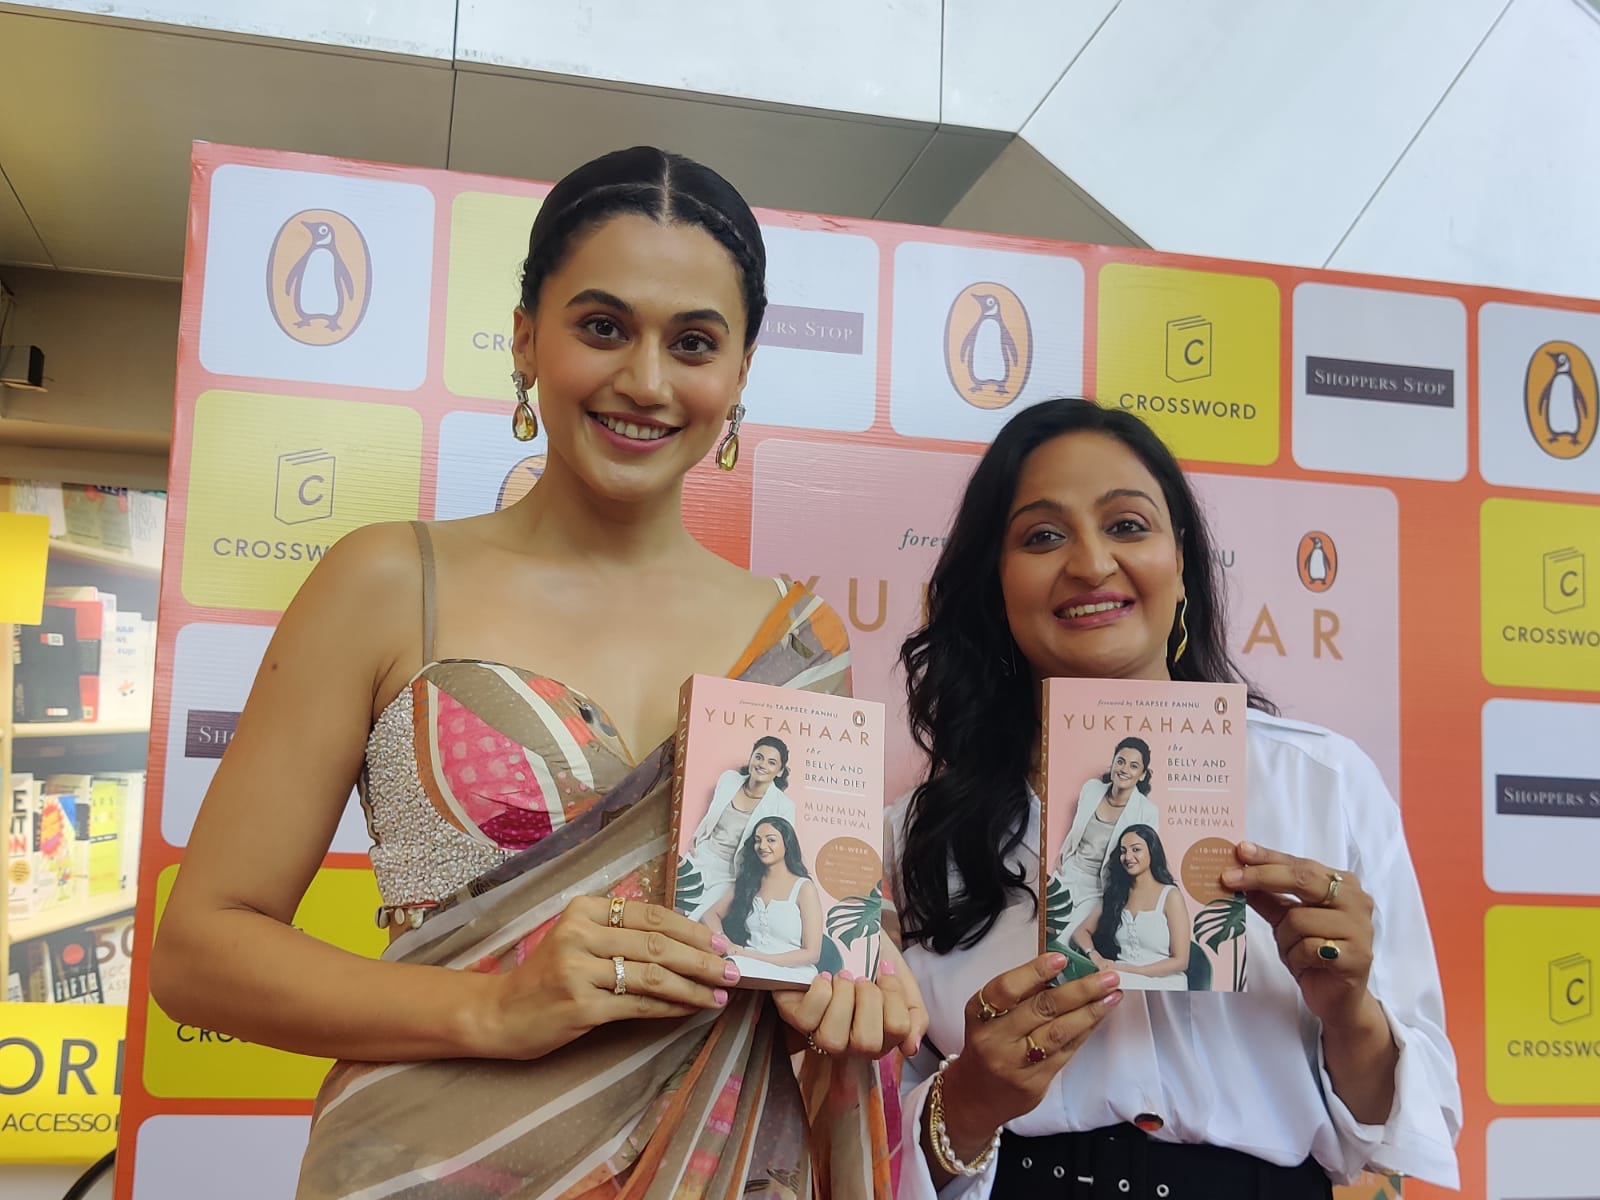 Book Yuktahaar The Belly And Brain Diet By Munmun Ganeriwal” Is Launched By Renowned Bollywood